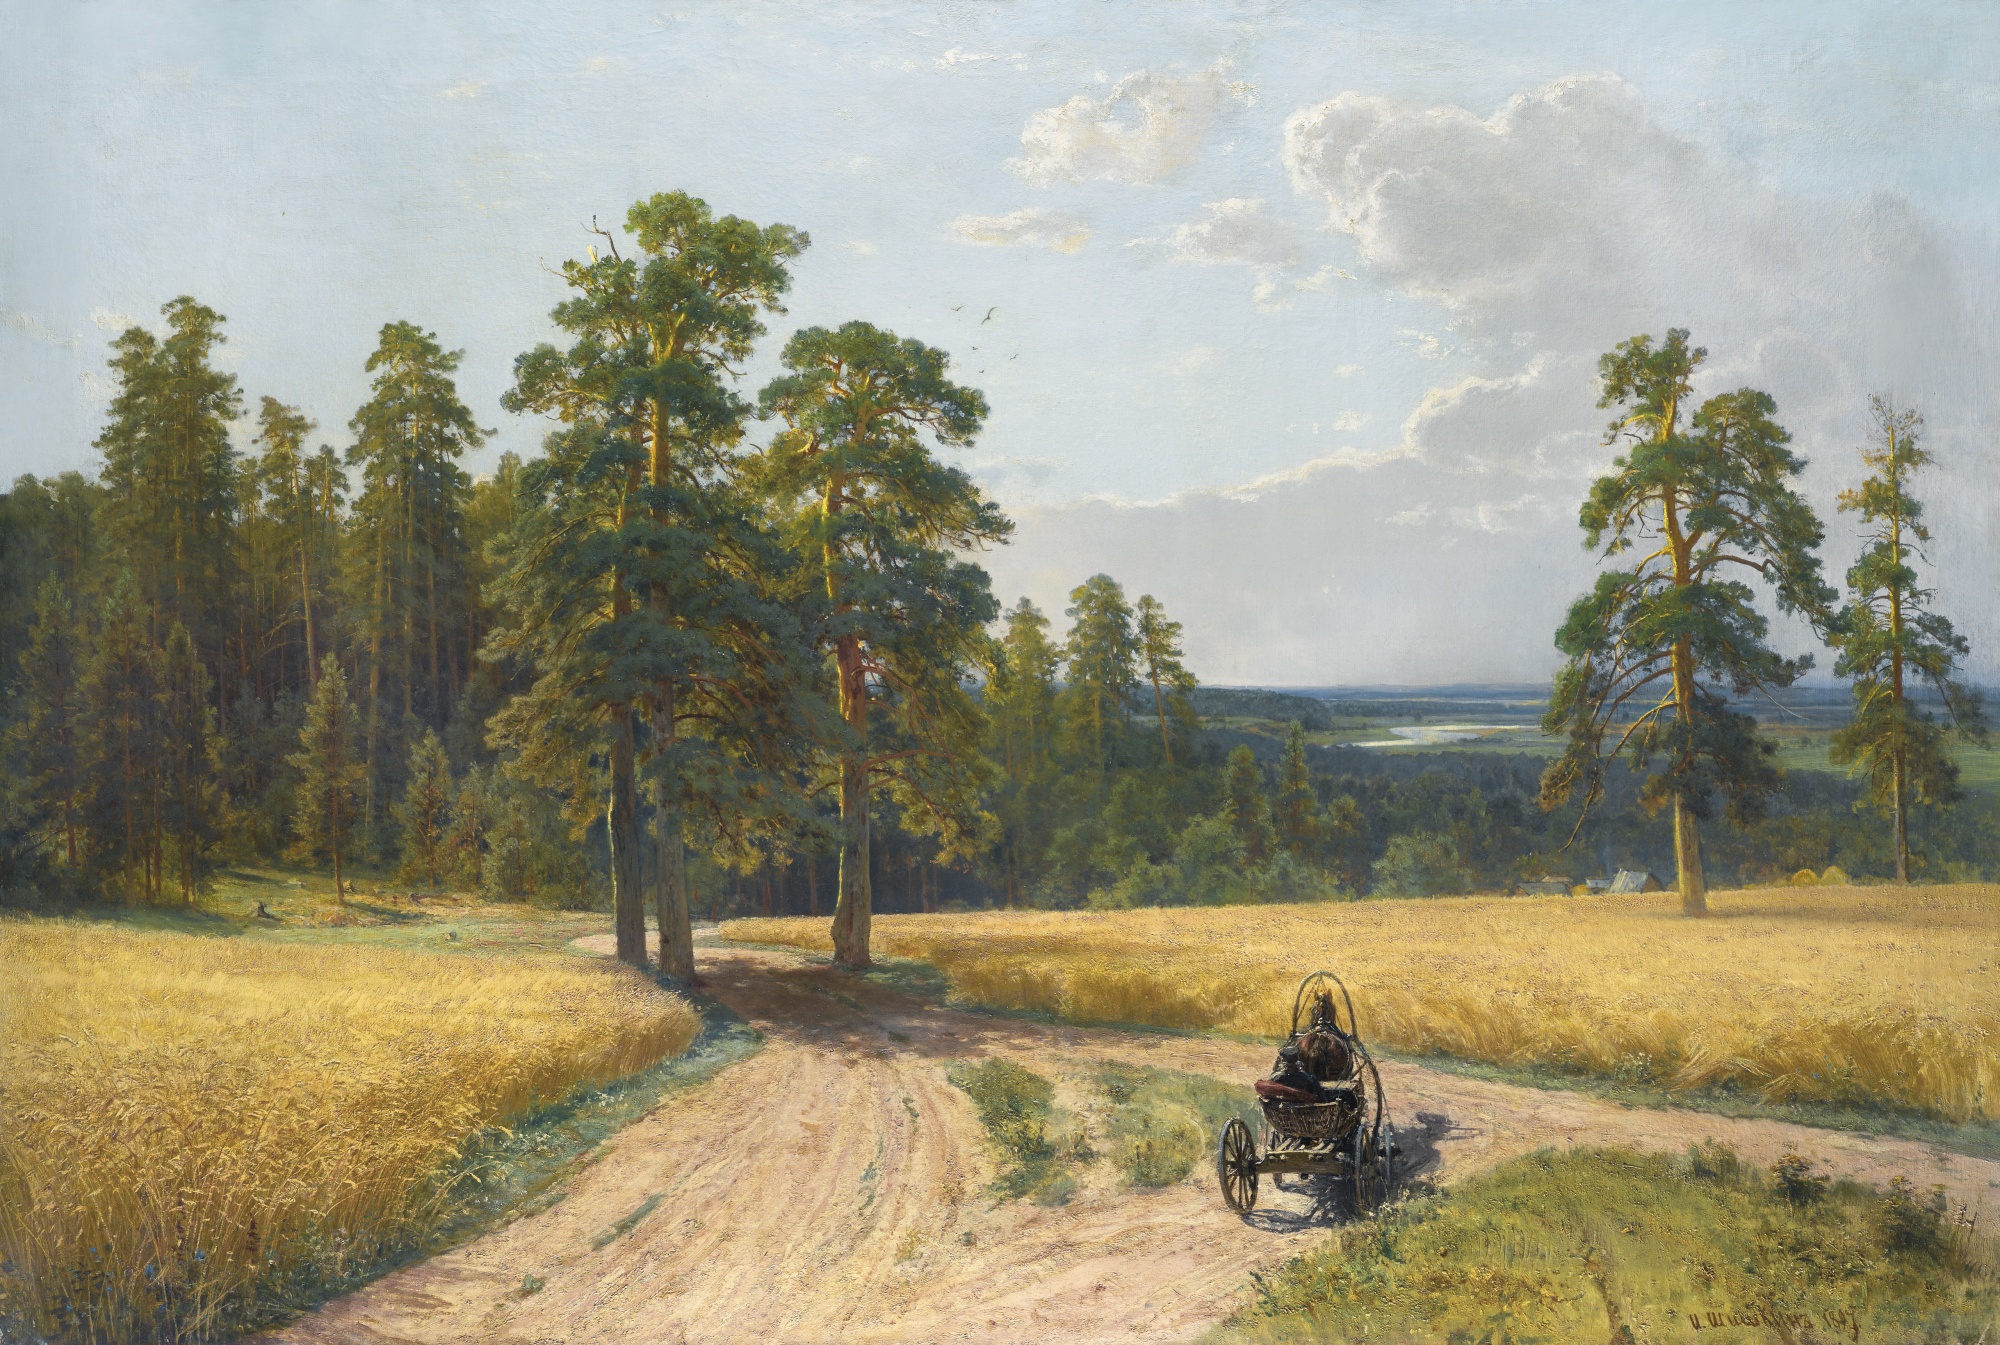 Ivan Shishkin, At the edge of the pine forest, 1897. Source: courtesy of Sotheby's 